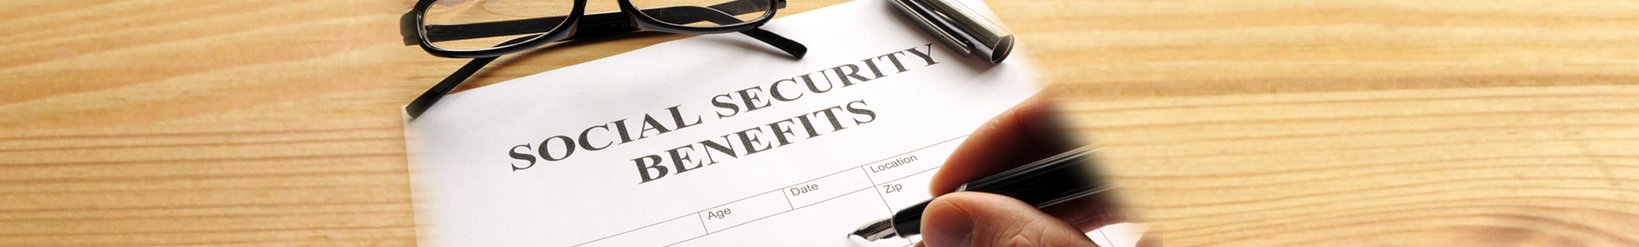 Social Security Disability Benefits for Leukemia (Page 1)